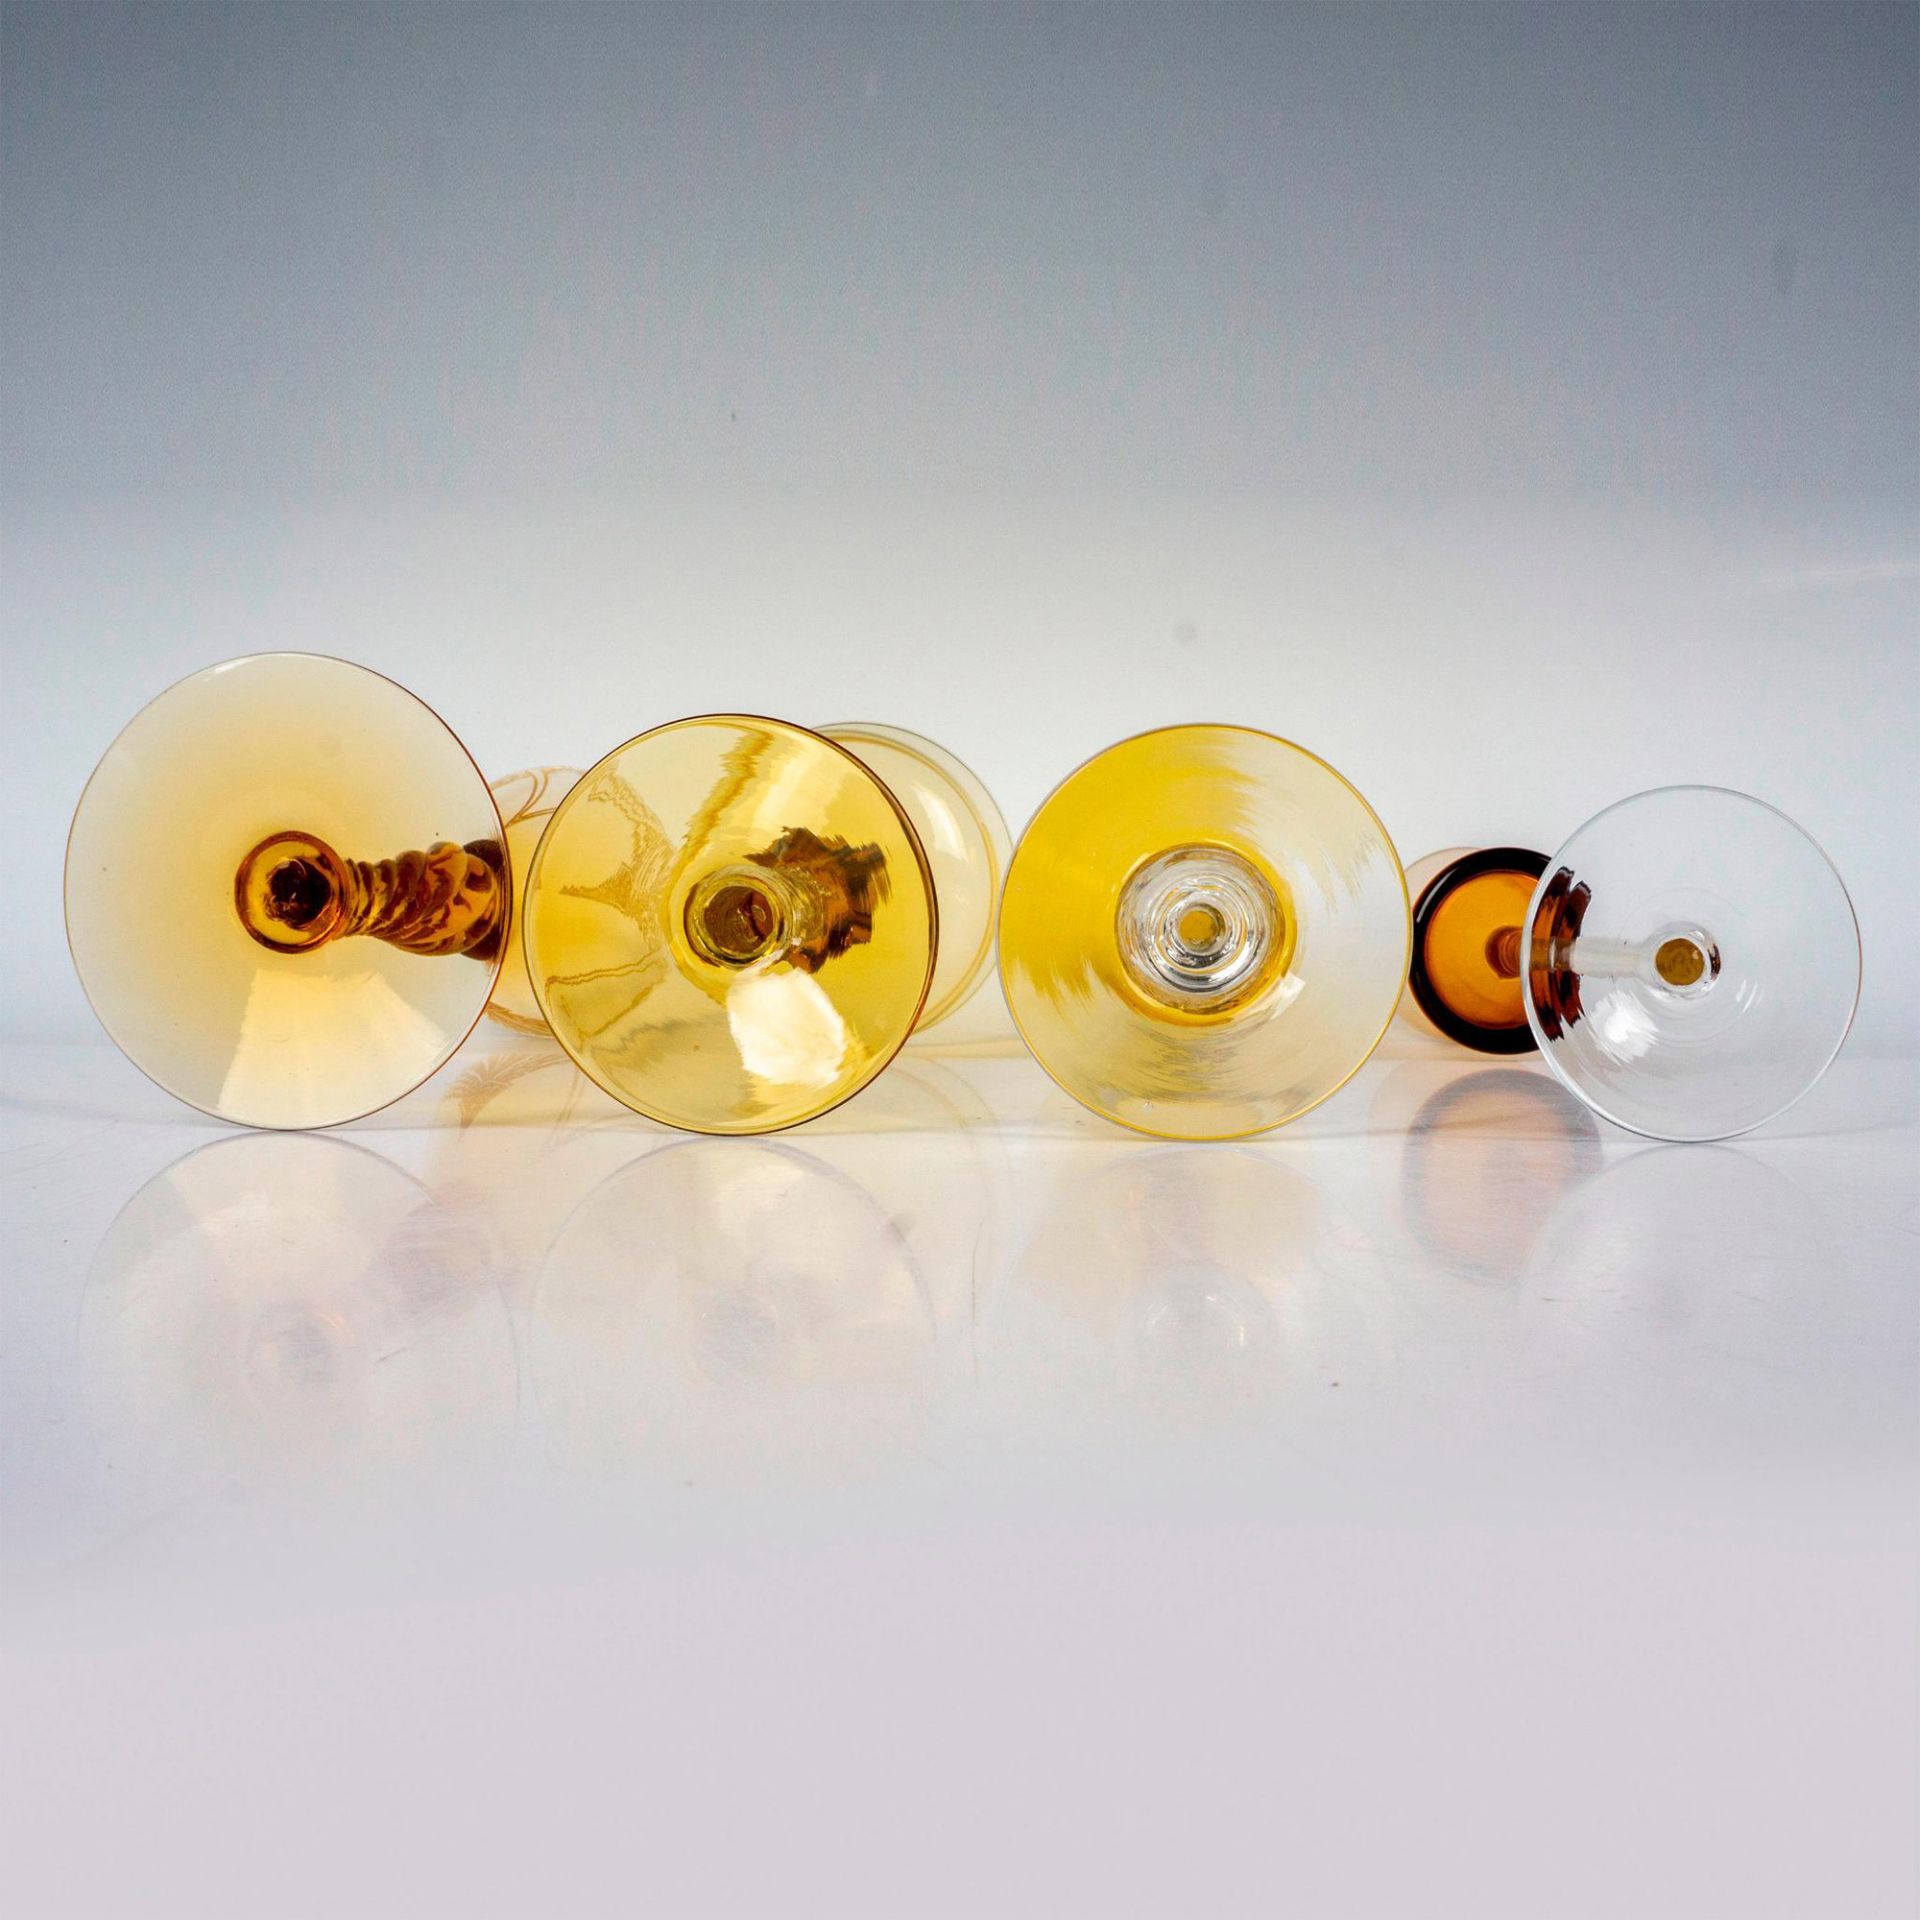 4pc Wine Glasses, Shades of Amber - Image 2 of 2